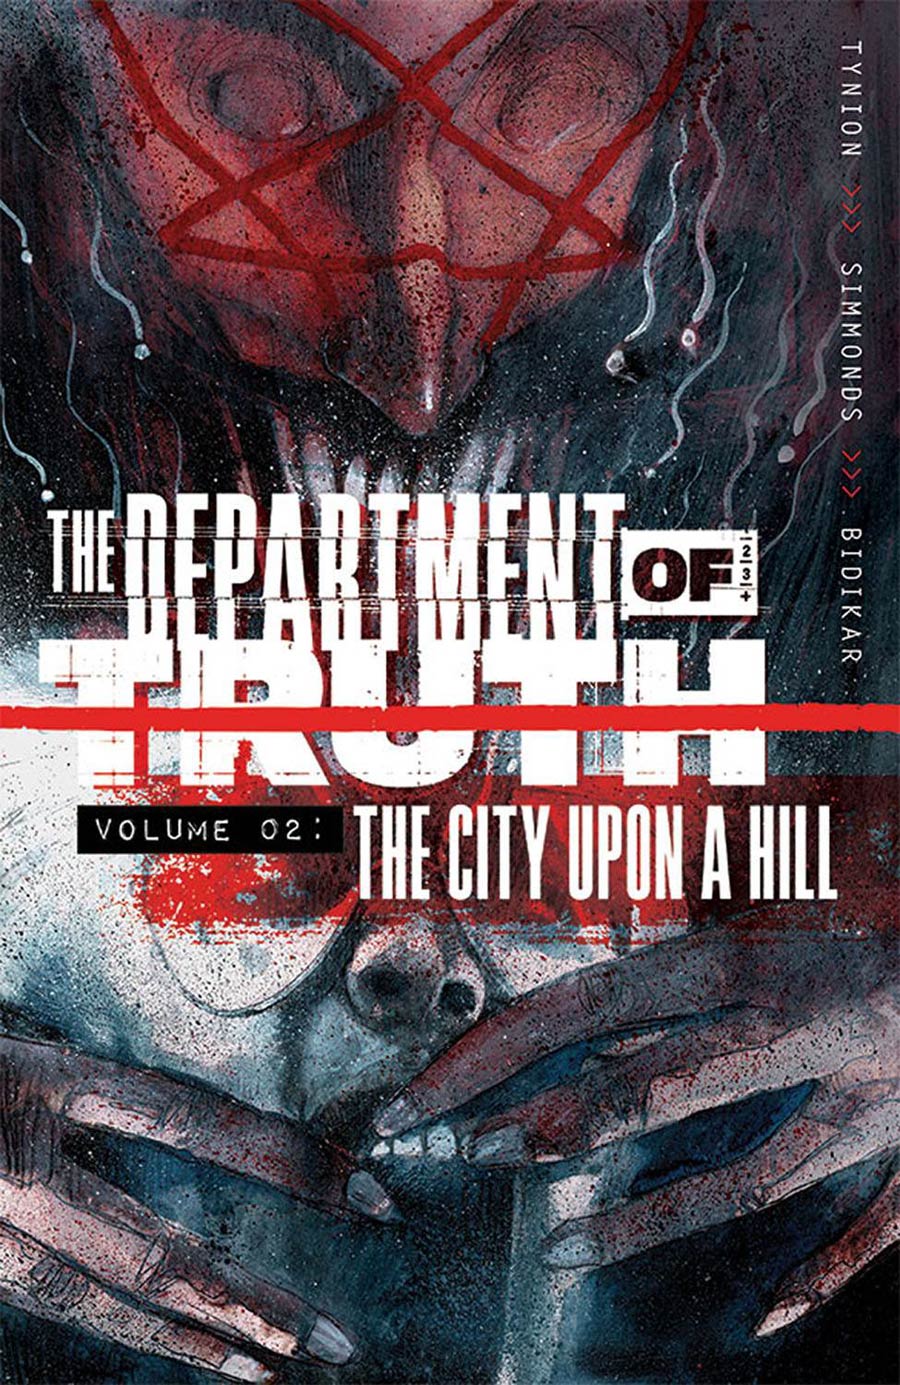 Department Of Truth Vol 2 The City Upon A Hill TP